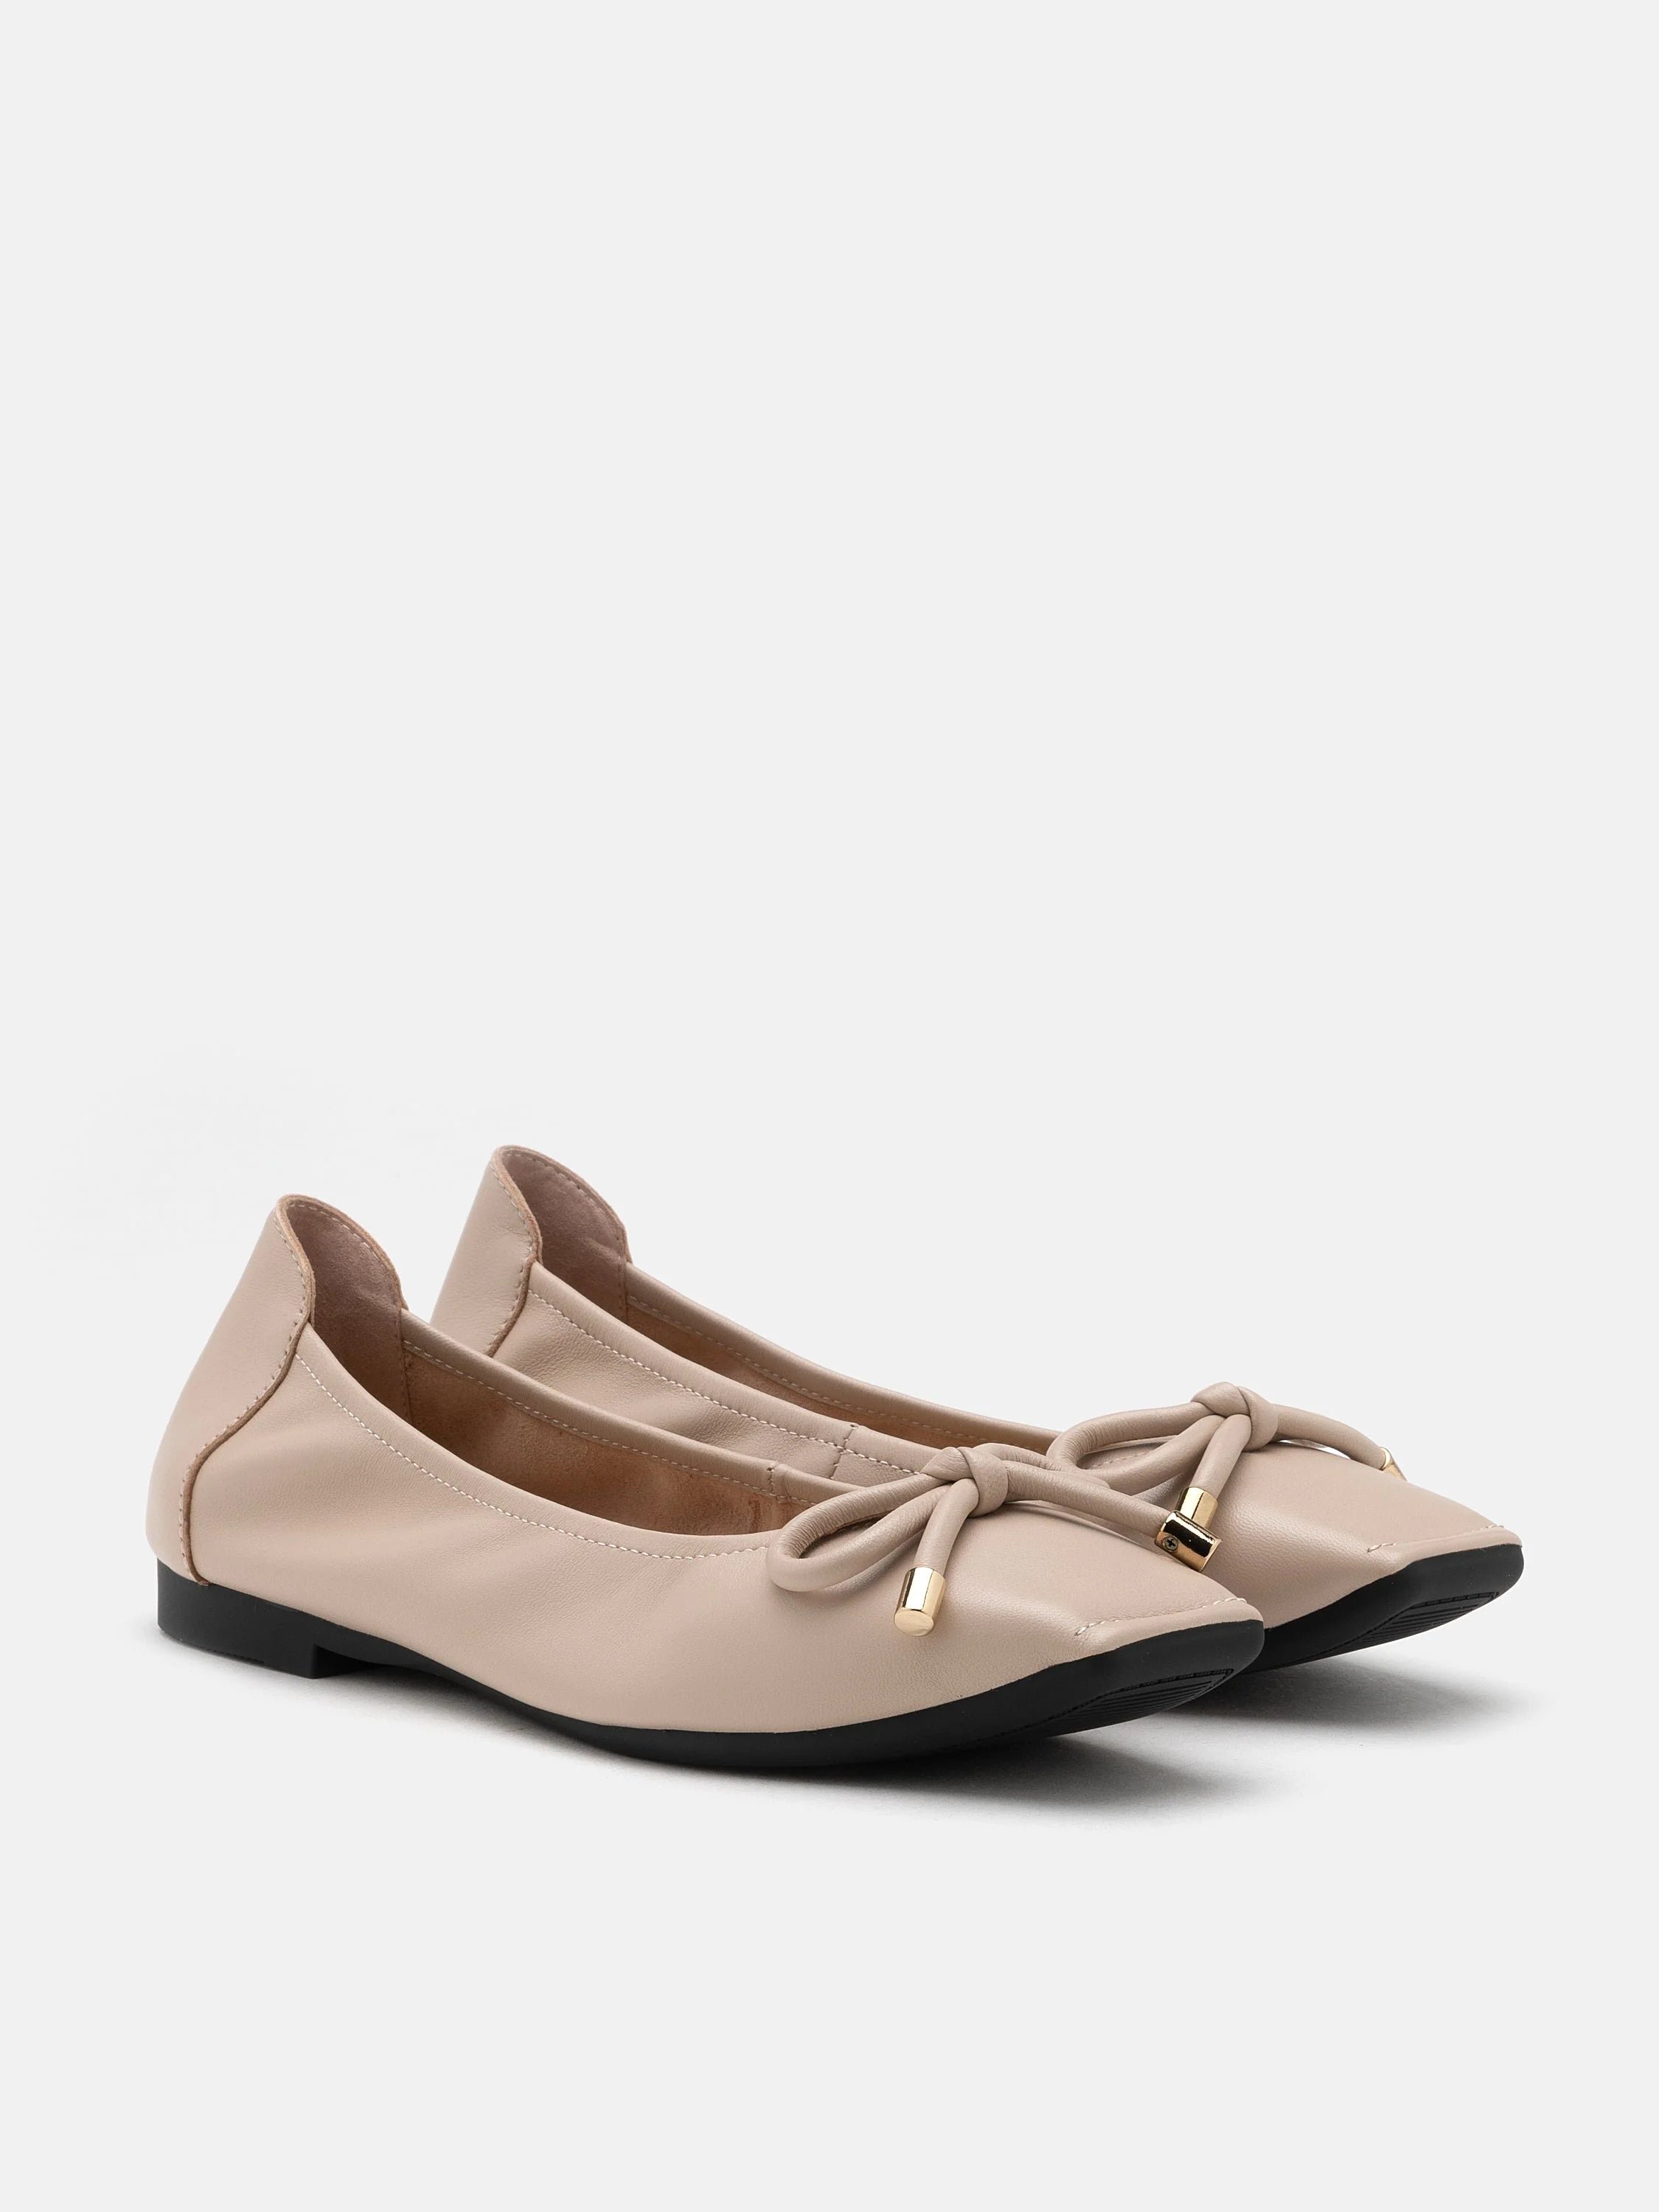 PAZZION, Raelynn Bow Square-Toe Covered Flats, Pink